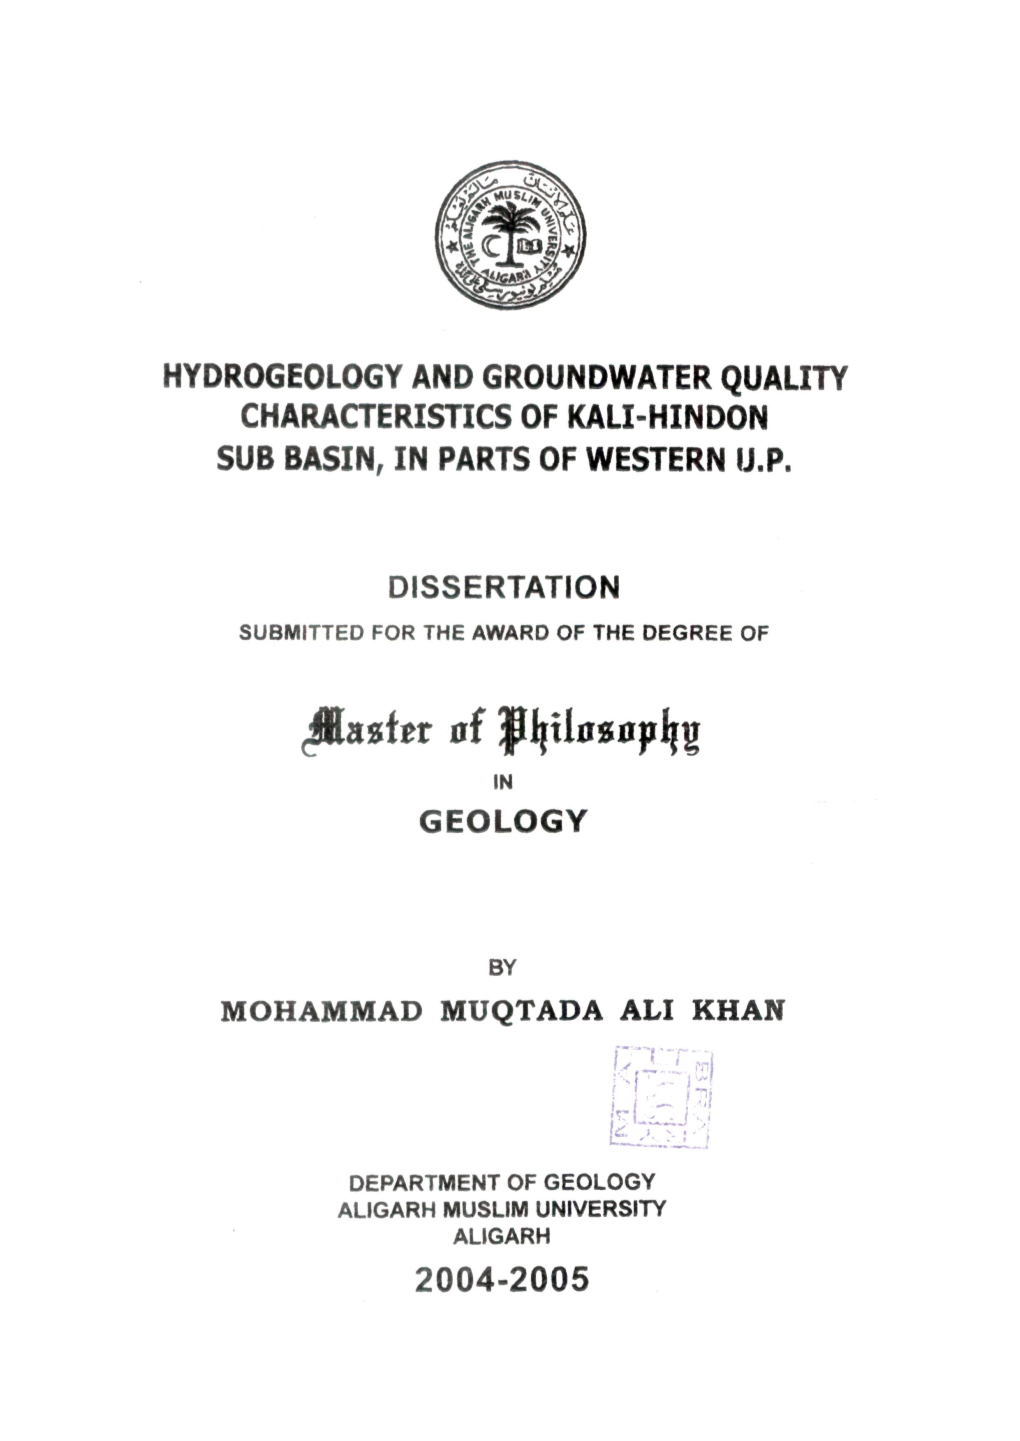 Hydrogeology and Groundwater Quality Characteristics of Kali-Hindon Sub Basin, in Parts of Western U.P